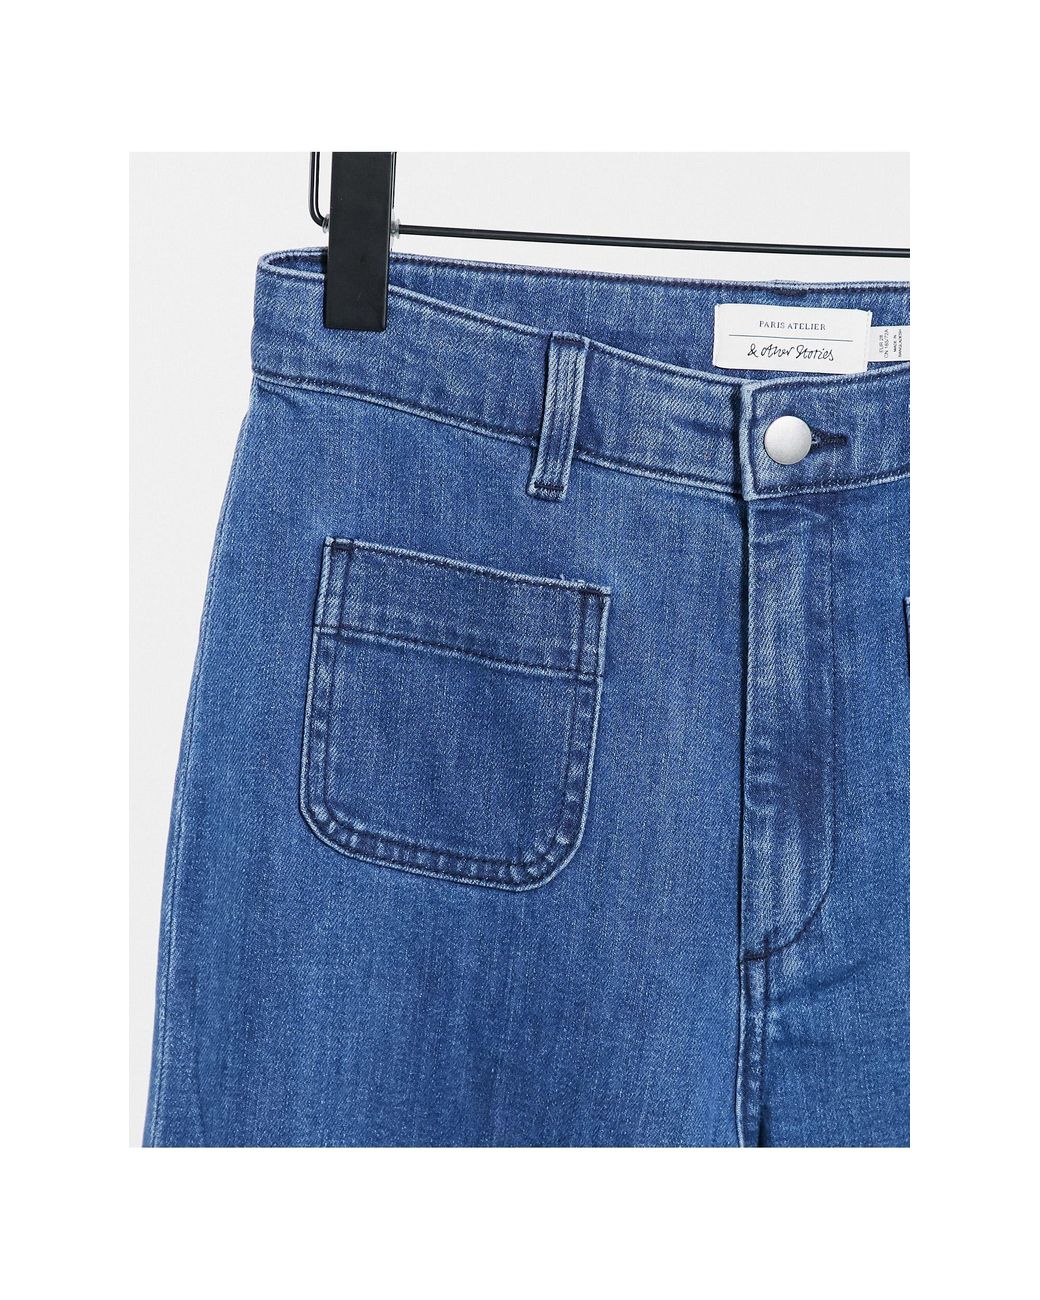  Other Stories Cotton Blend Flare Jeans in Blue - MBLUE